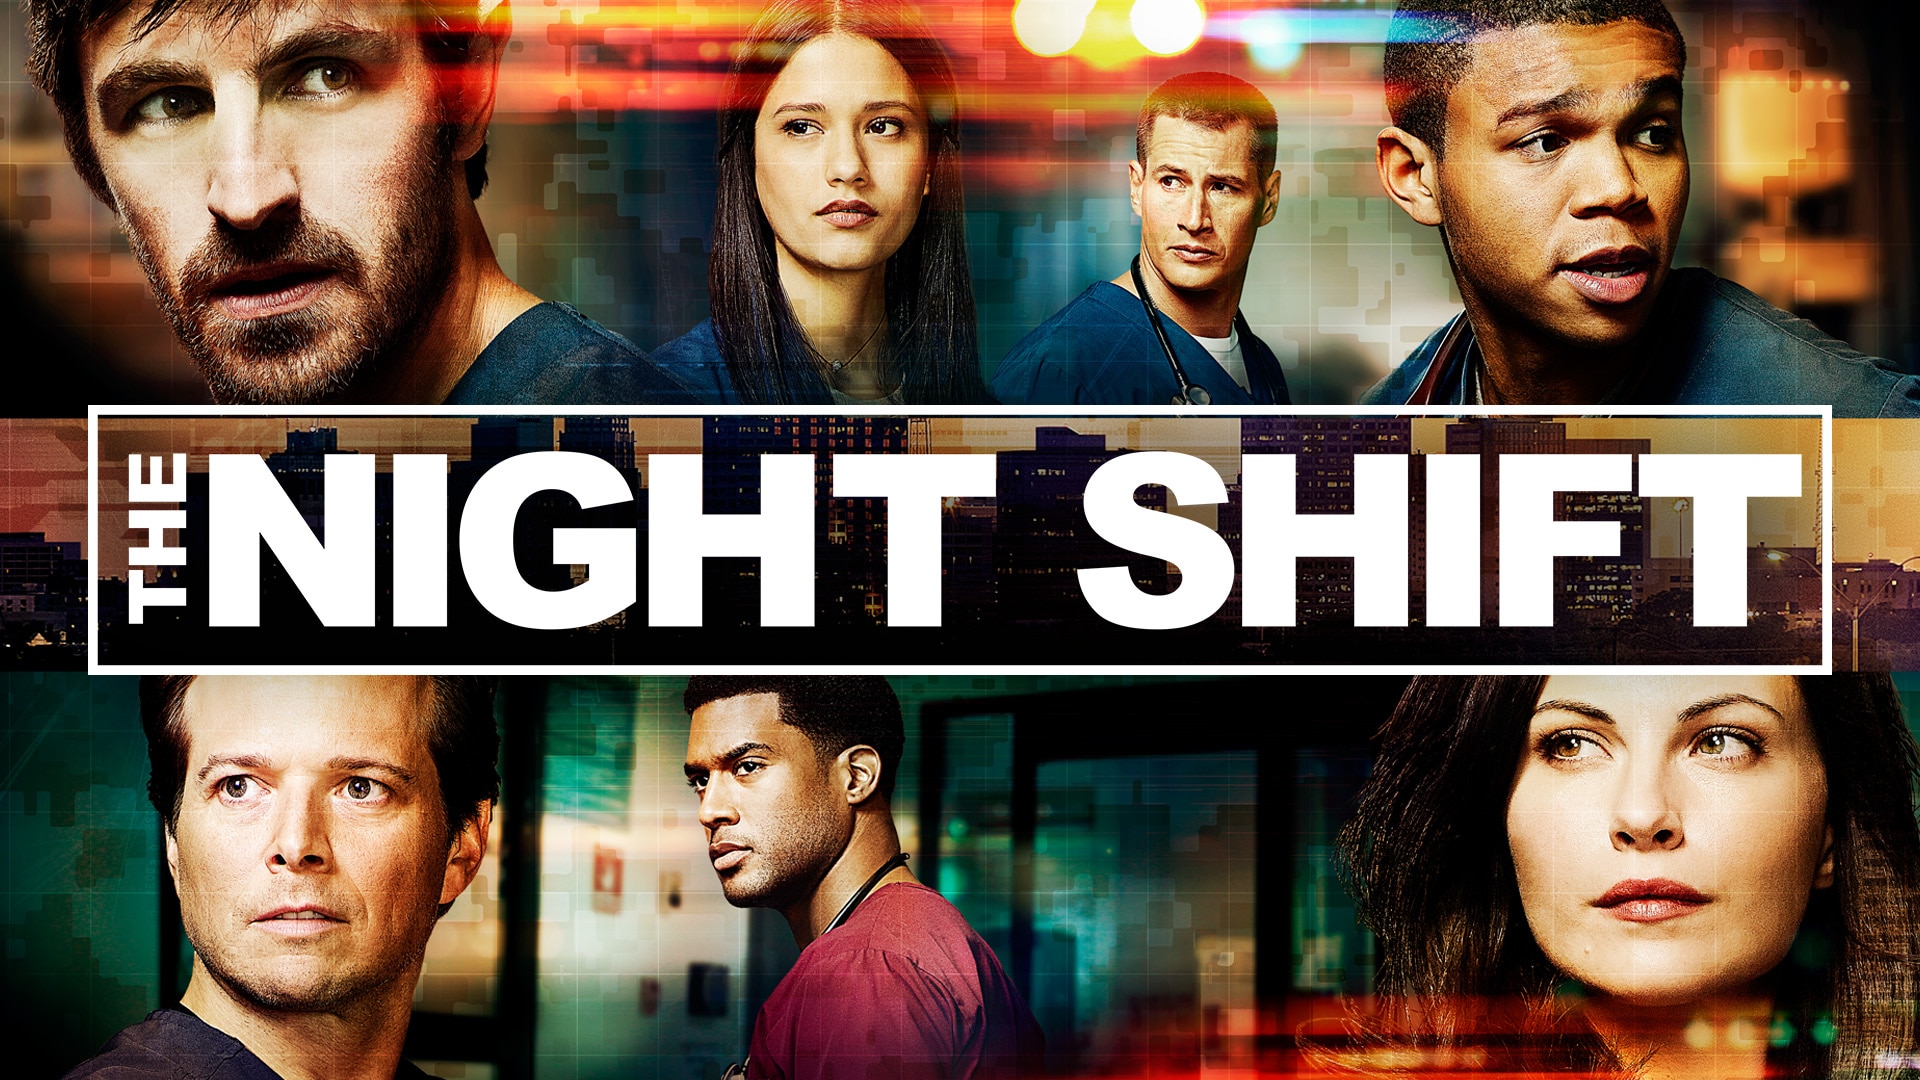 Watch The Night Shift Episodes at NBC.com